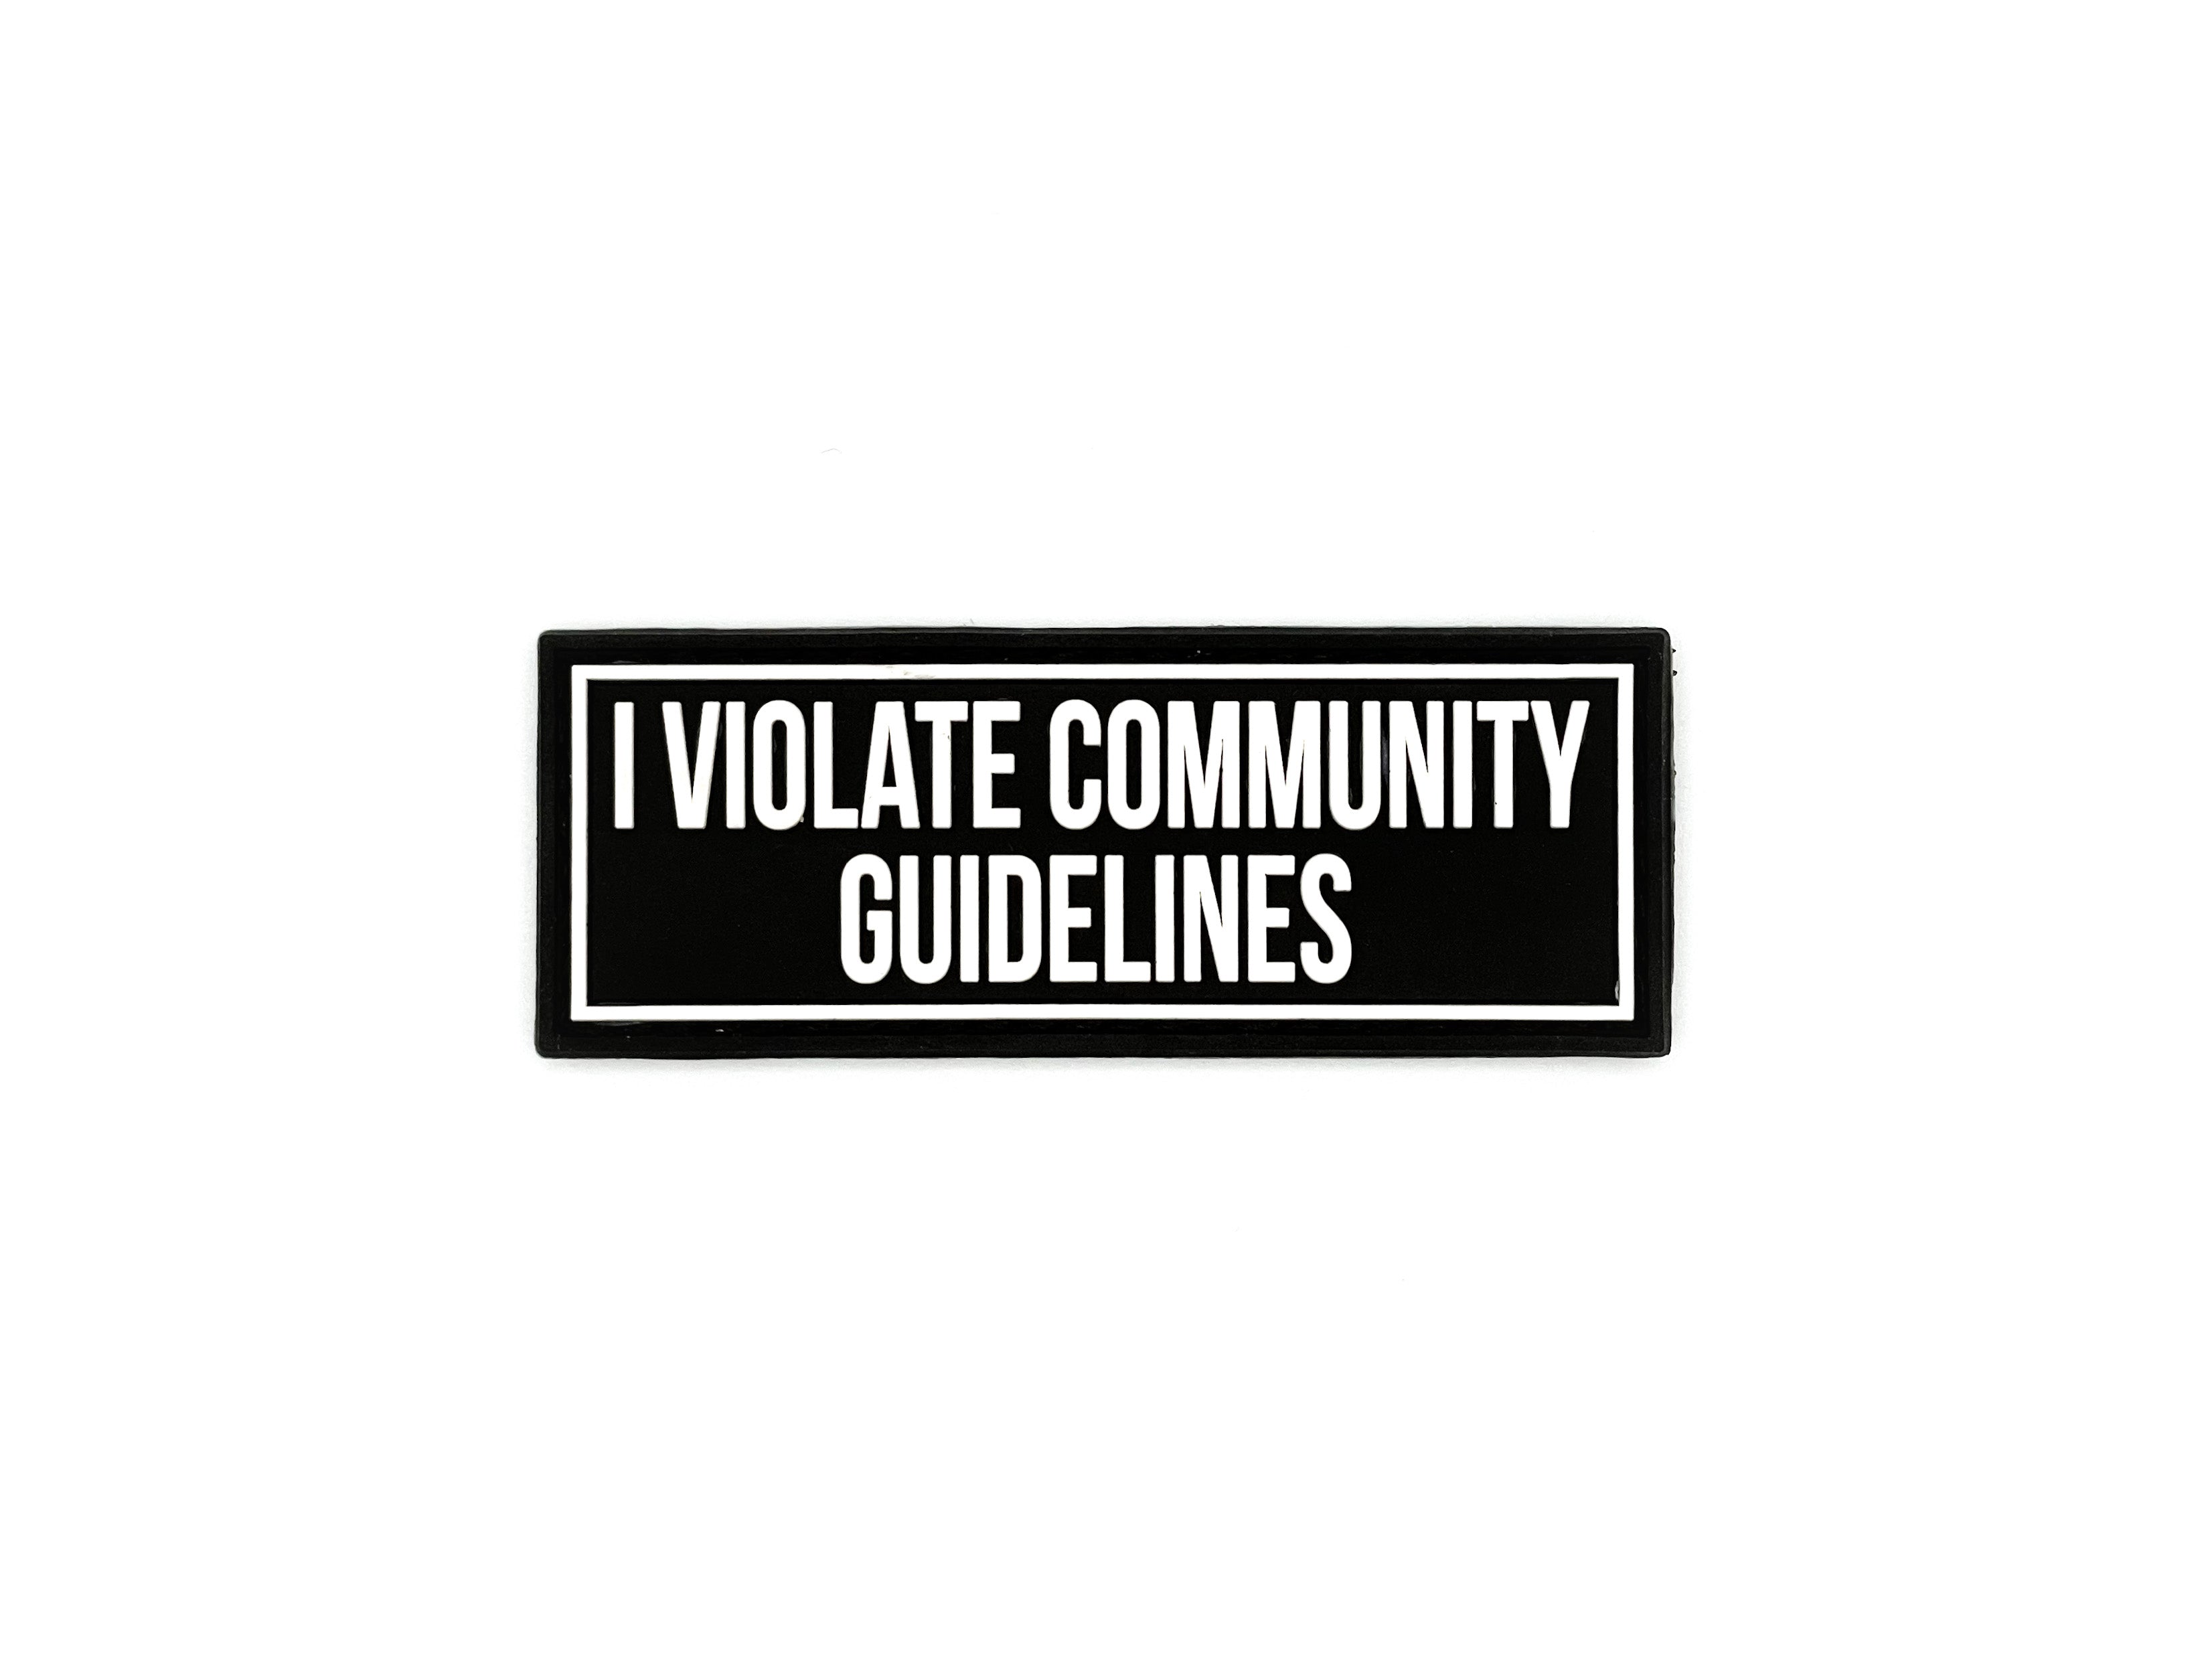 I Violate Community Guidelines